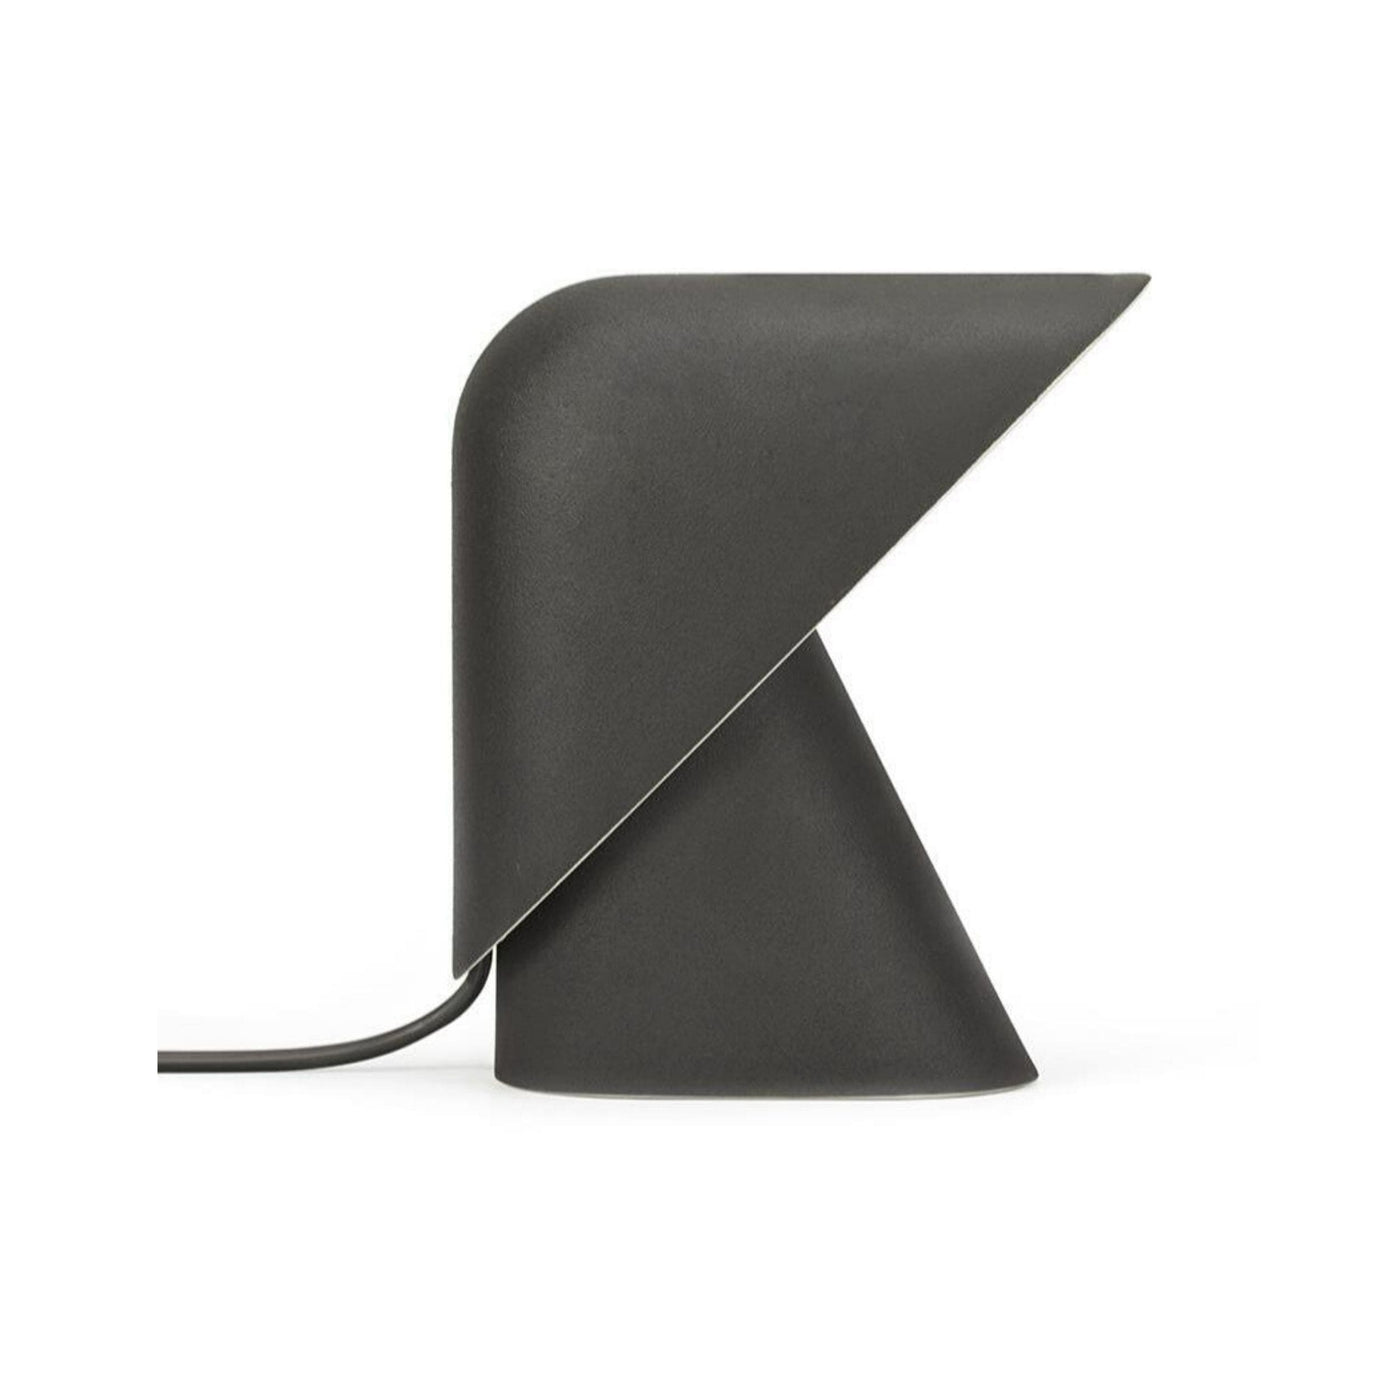 VItamins ceramic K Lamp in black with a striking silhouette. Ideal table or desk lamp for bedrooms, living rooms or home office. #colour_black